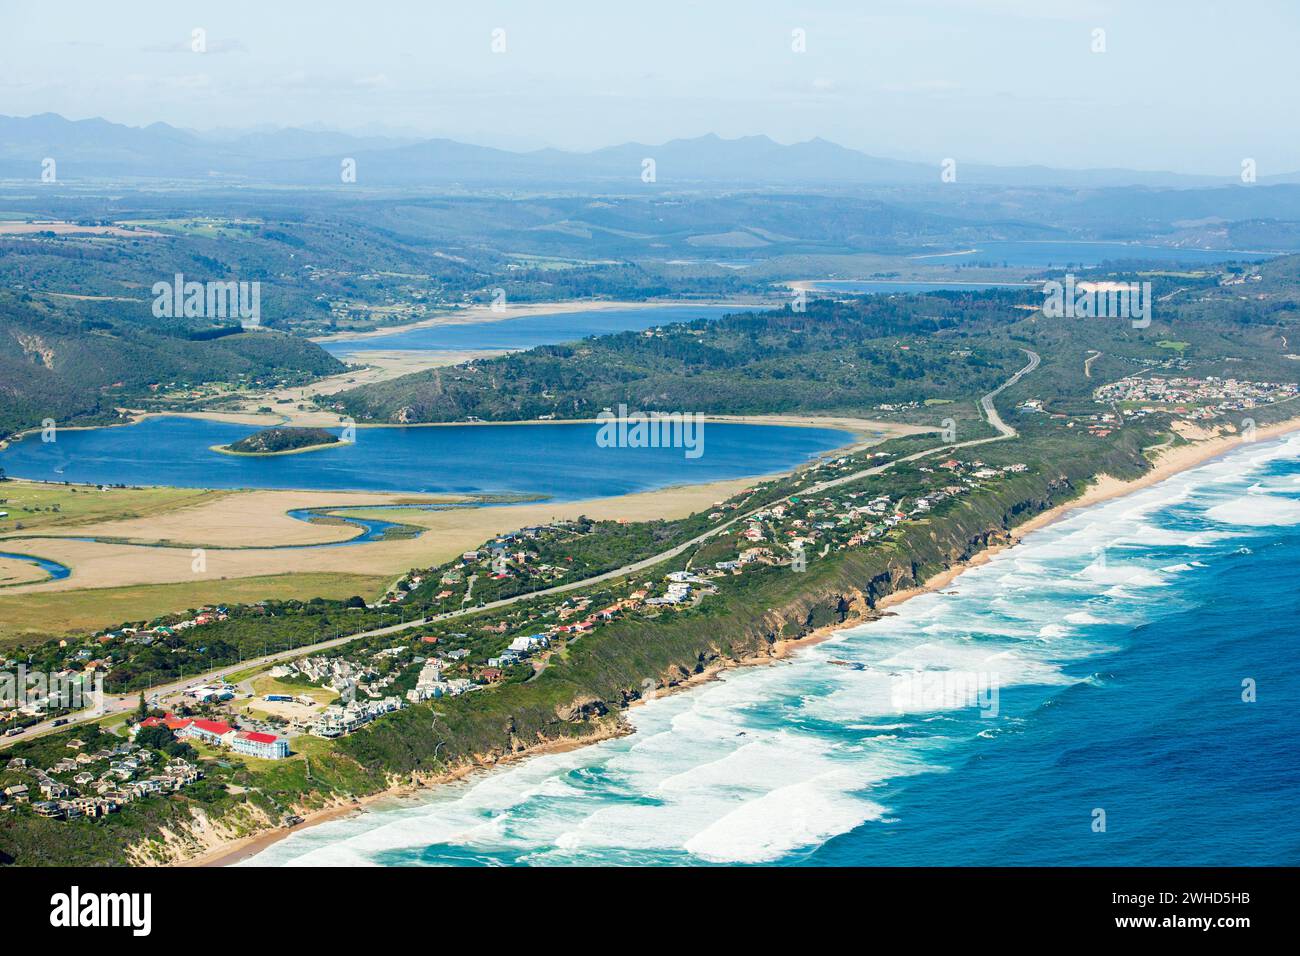 Aerial view, Africa, Garden Route, Garden Route National Park, Indian Ocean, N2 Highway, South Africa, Western Cape Province, wilderness, daytime, nature, outdoors, tourism, beauty in nature, Coast, Coastal city, Marine, Ocean, Sea, scenic Stock Photo